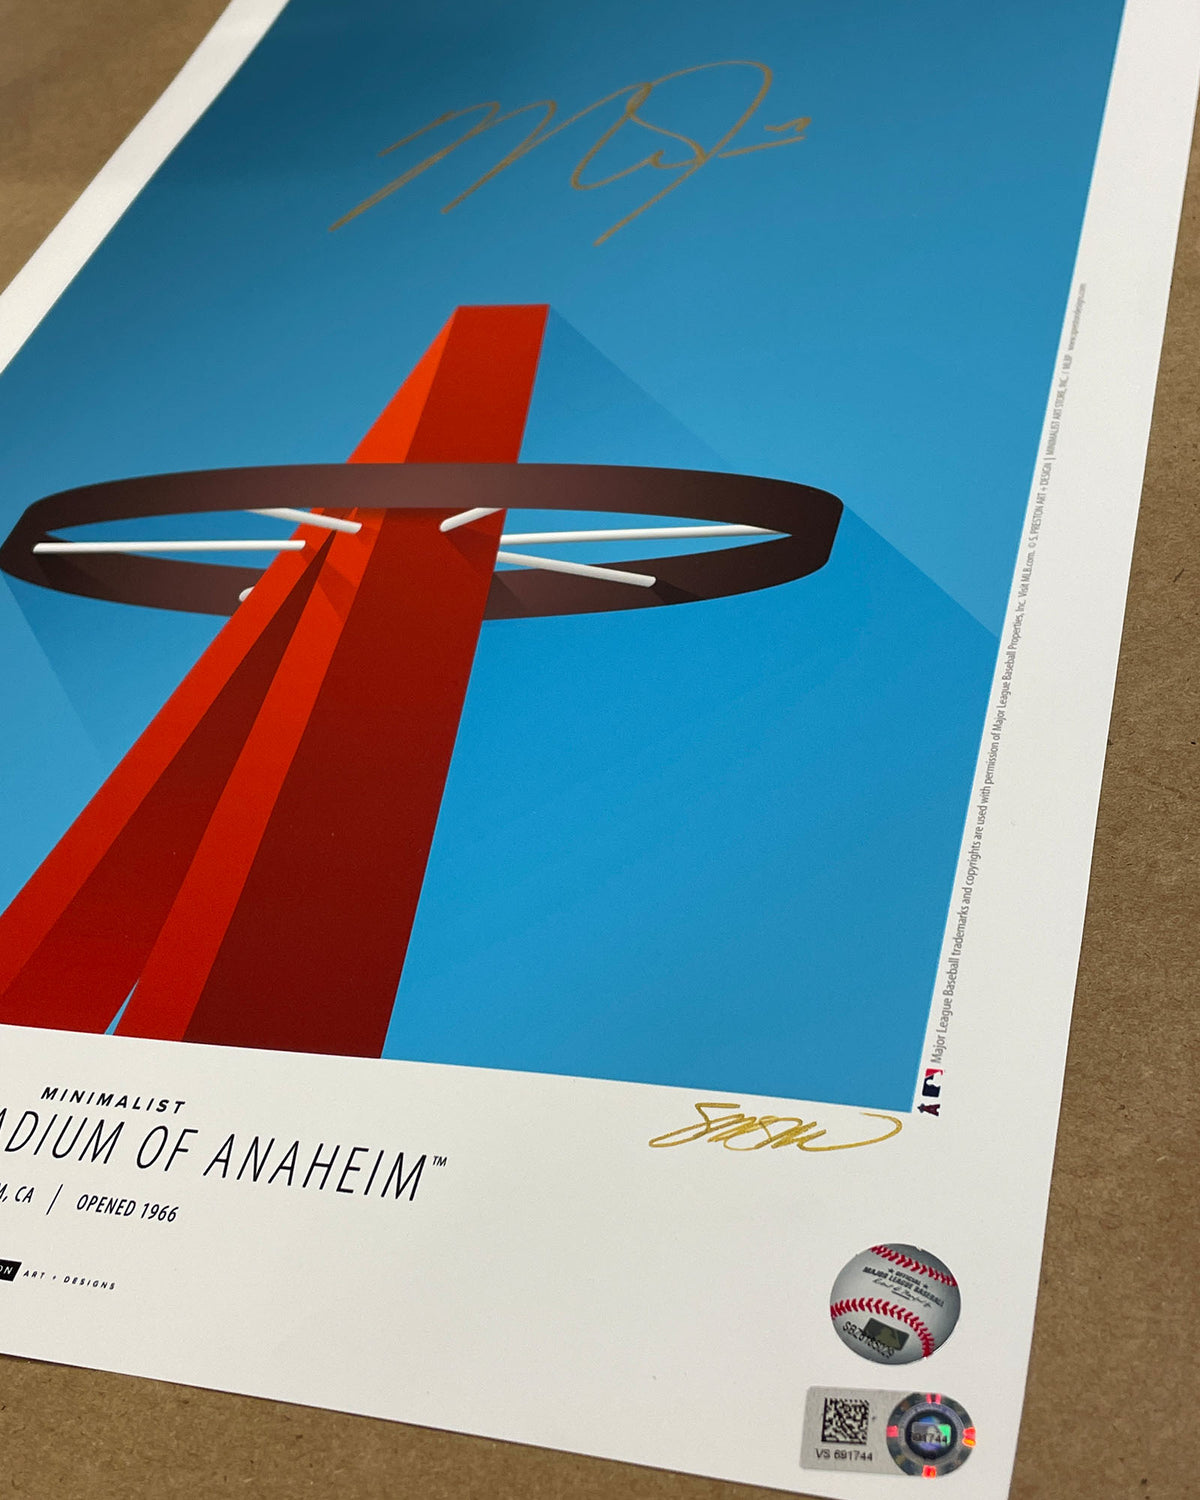 Minimalist Angel Stadium - Mike Trout Autographed - Poster Print - MLB Authenticated